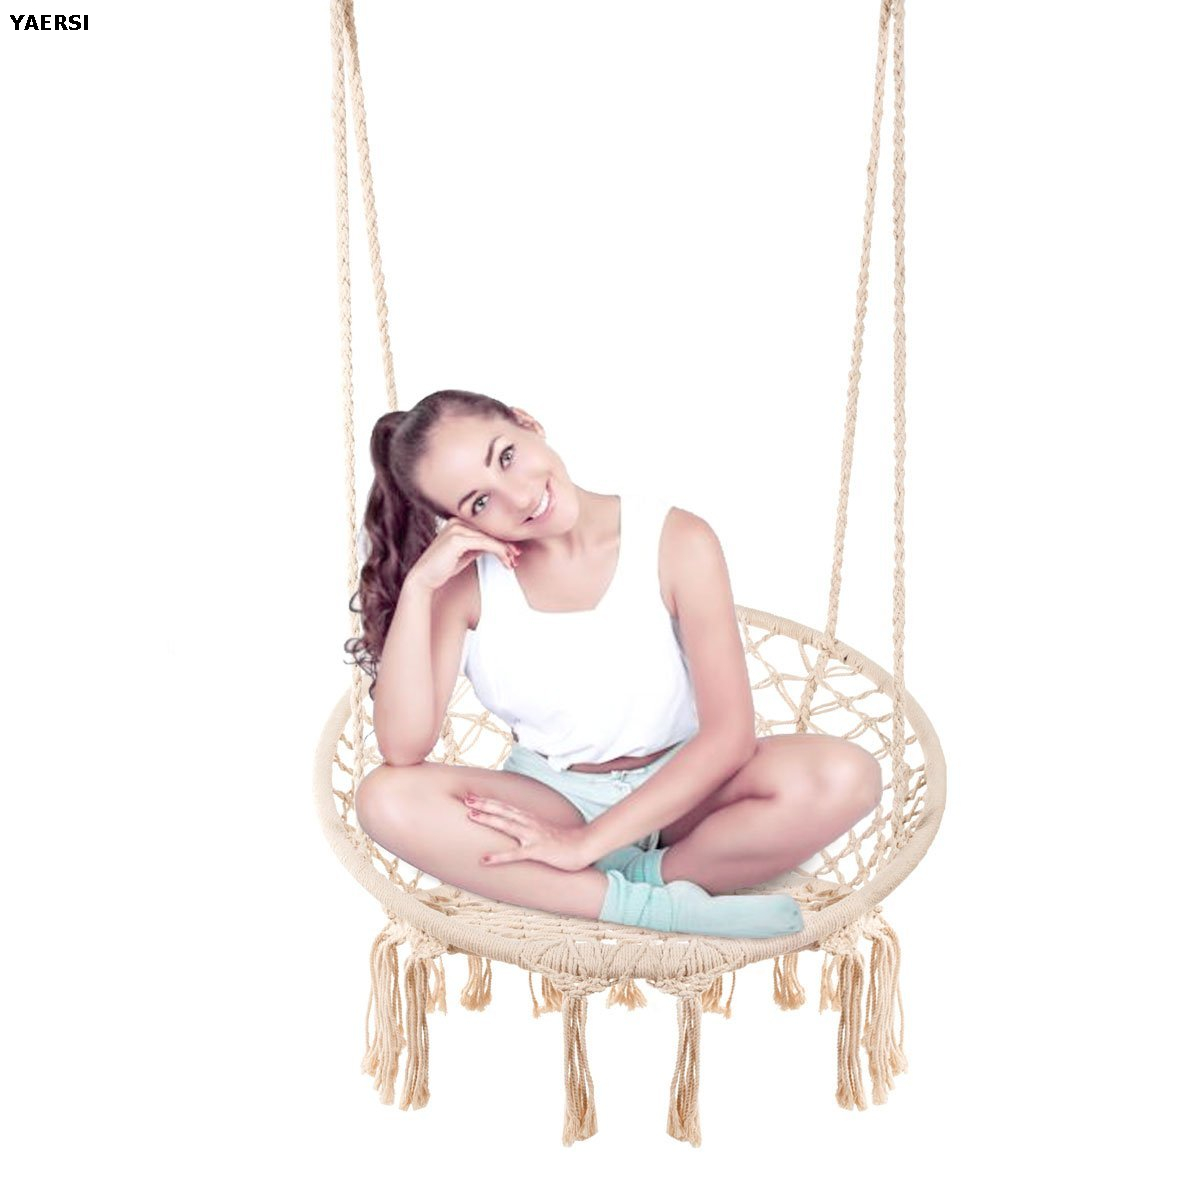 Handmade Macrame Hammock Swing Chair for inddor and outdoor